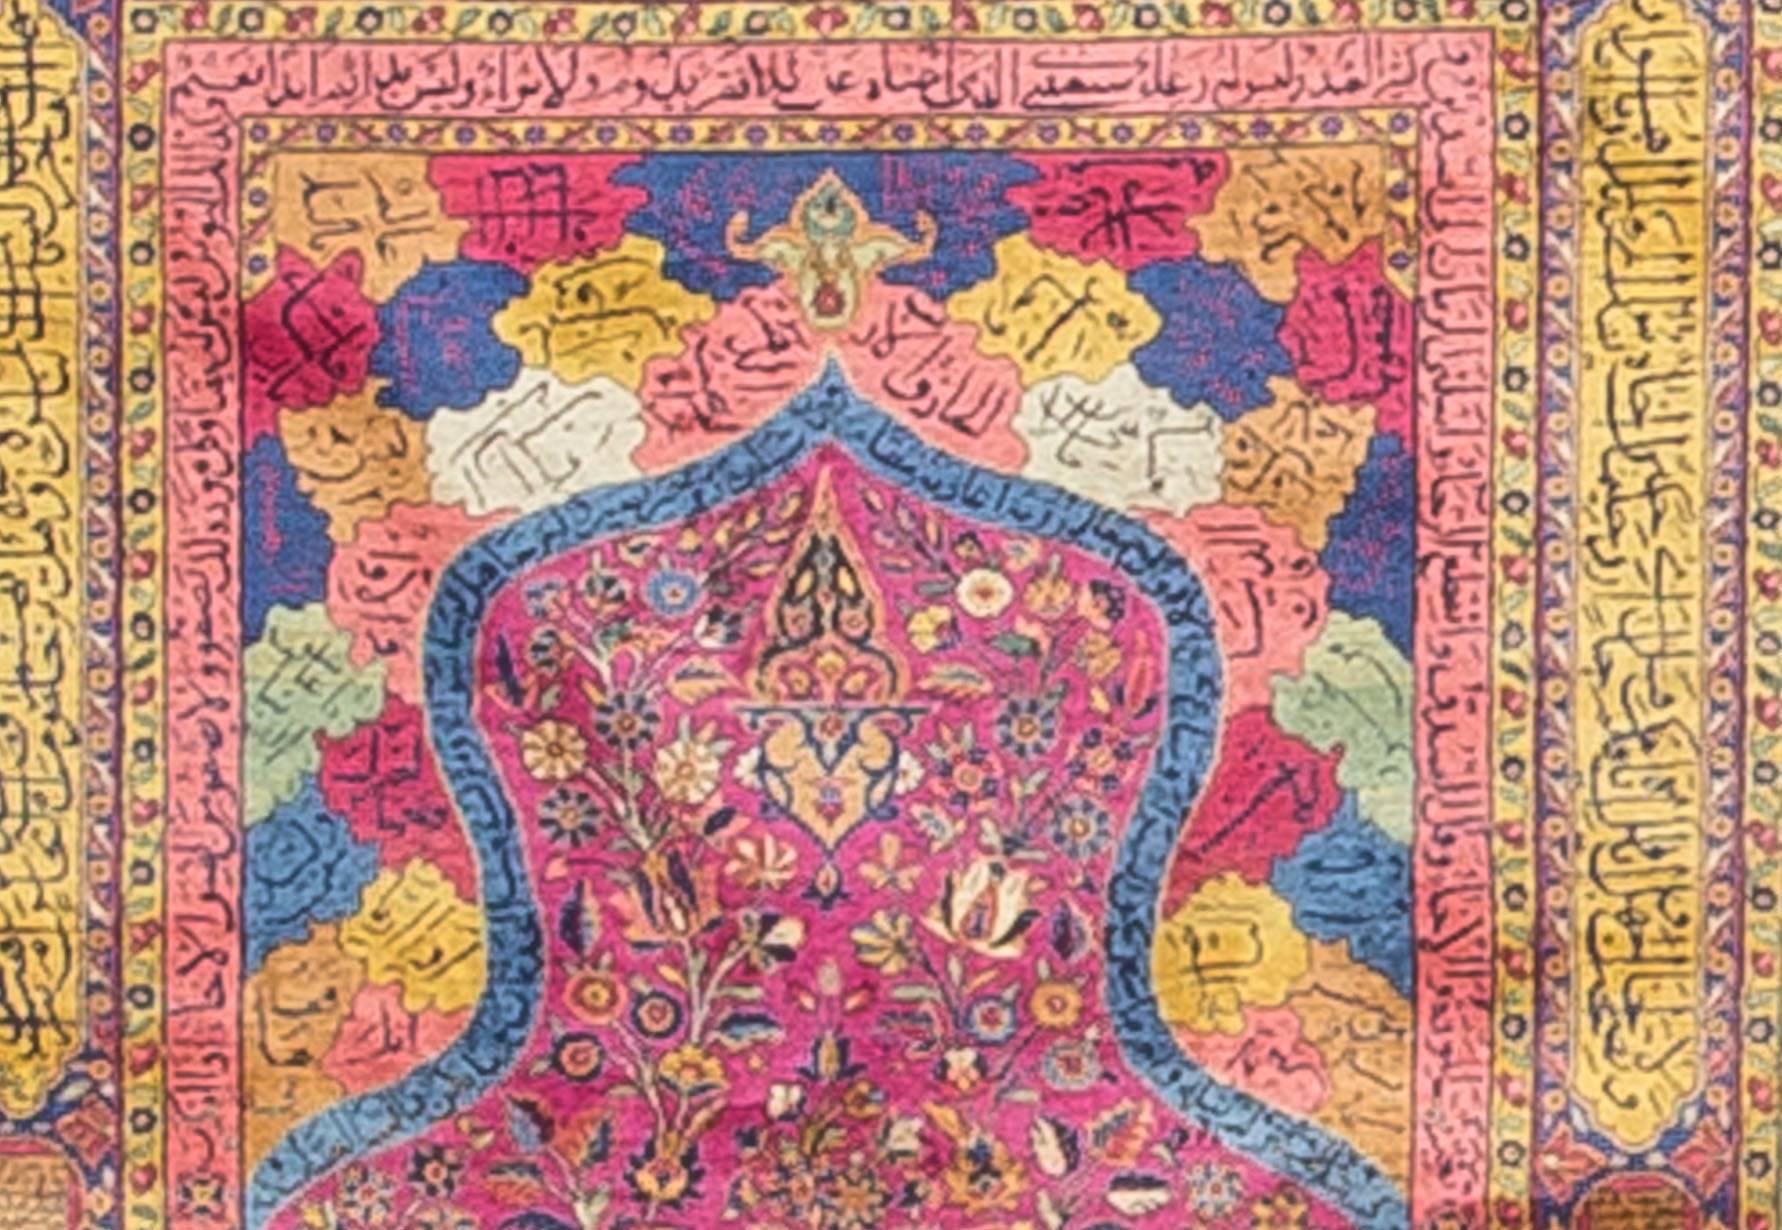 A Persian Kashan silk prayer rug with Qur’anic inscriptions in its border, the rug drawing is after a 16th century design. The Metropolitan Museum gives these details talking about their 16th century rug 'This prayer rug or sajjadah, identified by